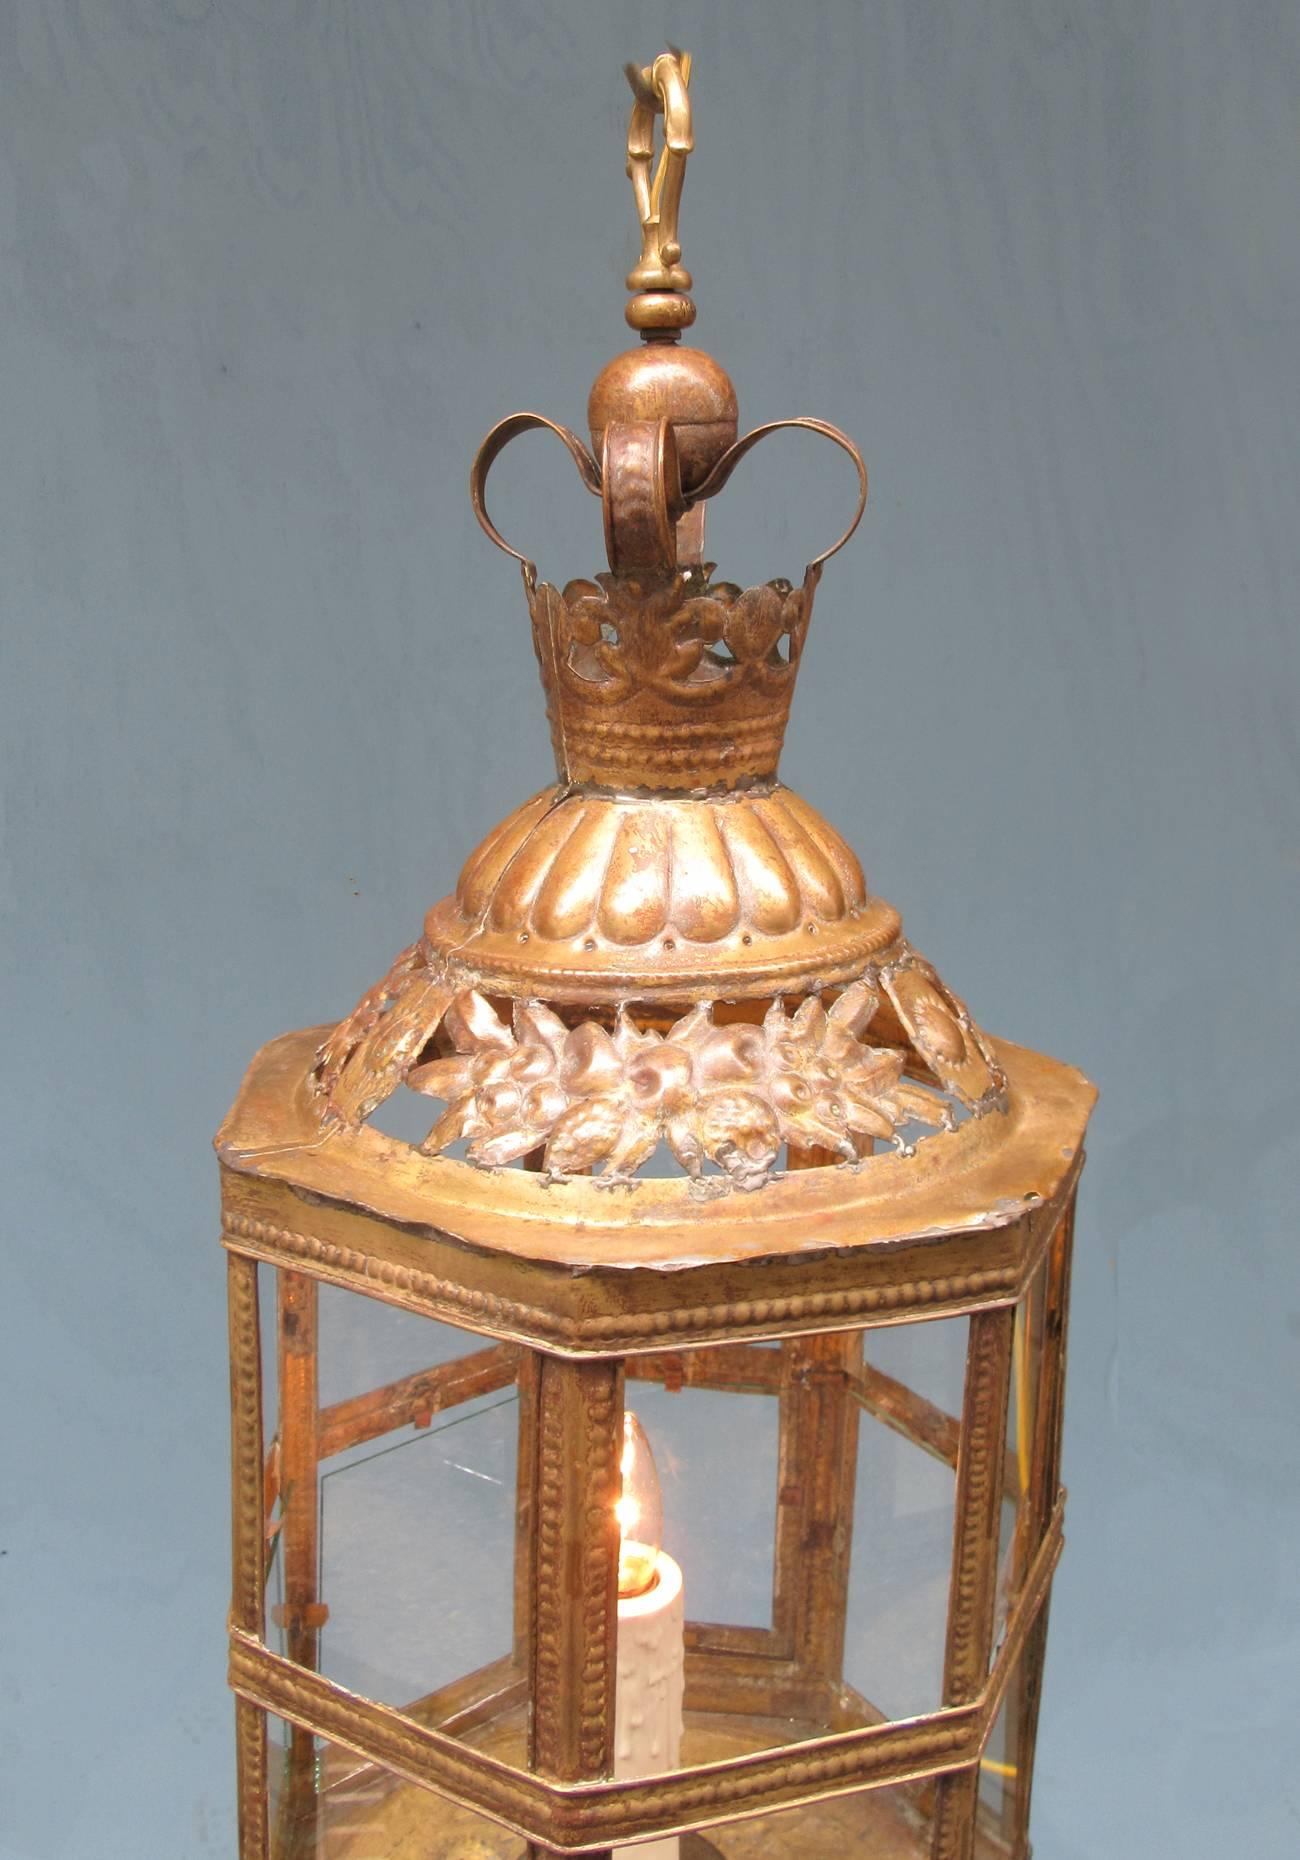 A mid-19th century Dutch Colonial brass and glass lantern from the Netherlands, circa 1850, with crown and stamped collar with pattern featuring sun and fruit motifs. The lantern has a single candle and has been recently rewired and has a new